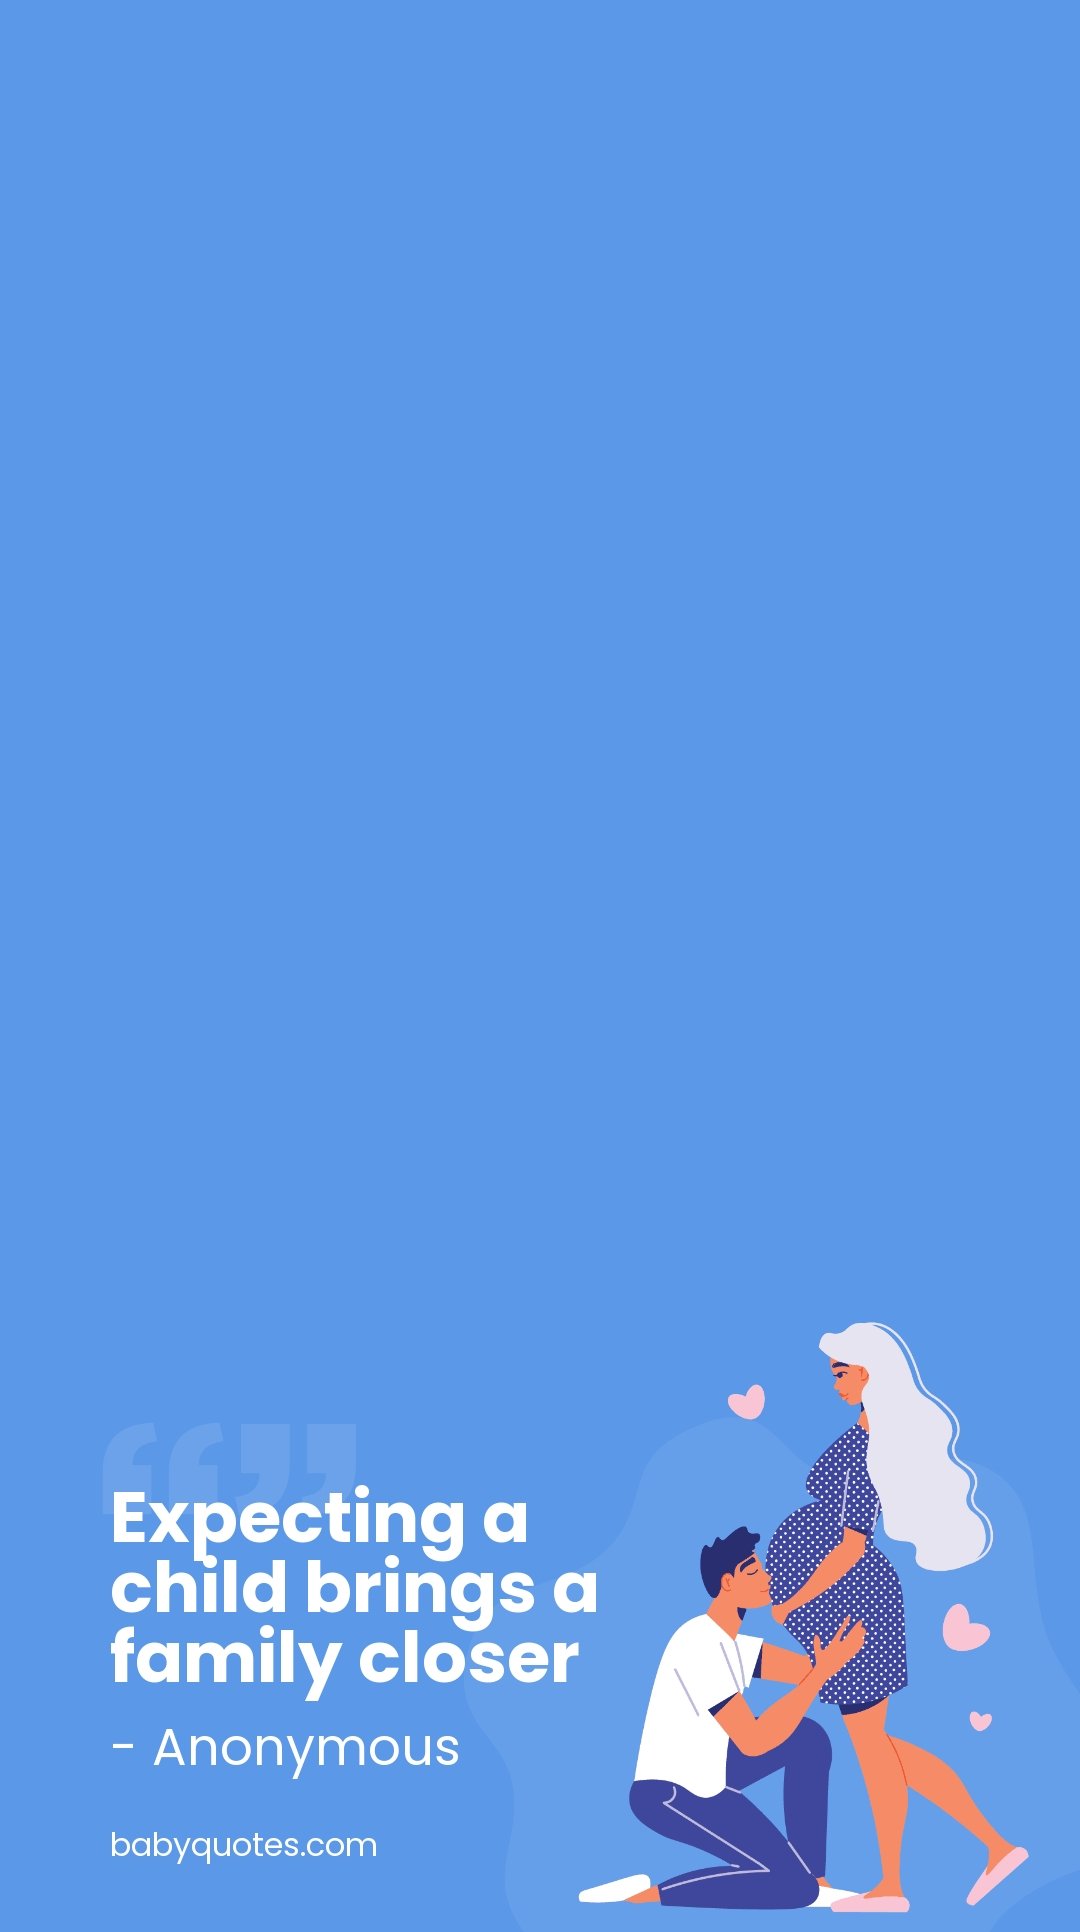 Pregnancy Announcement Quote Snapchat Geofilter